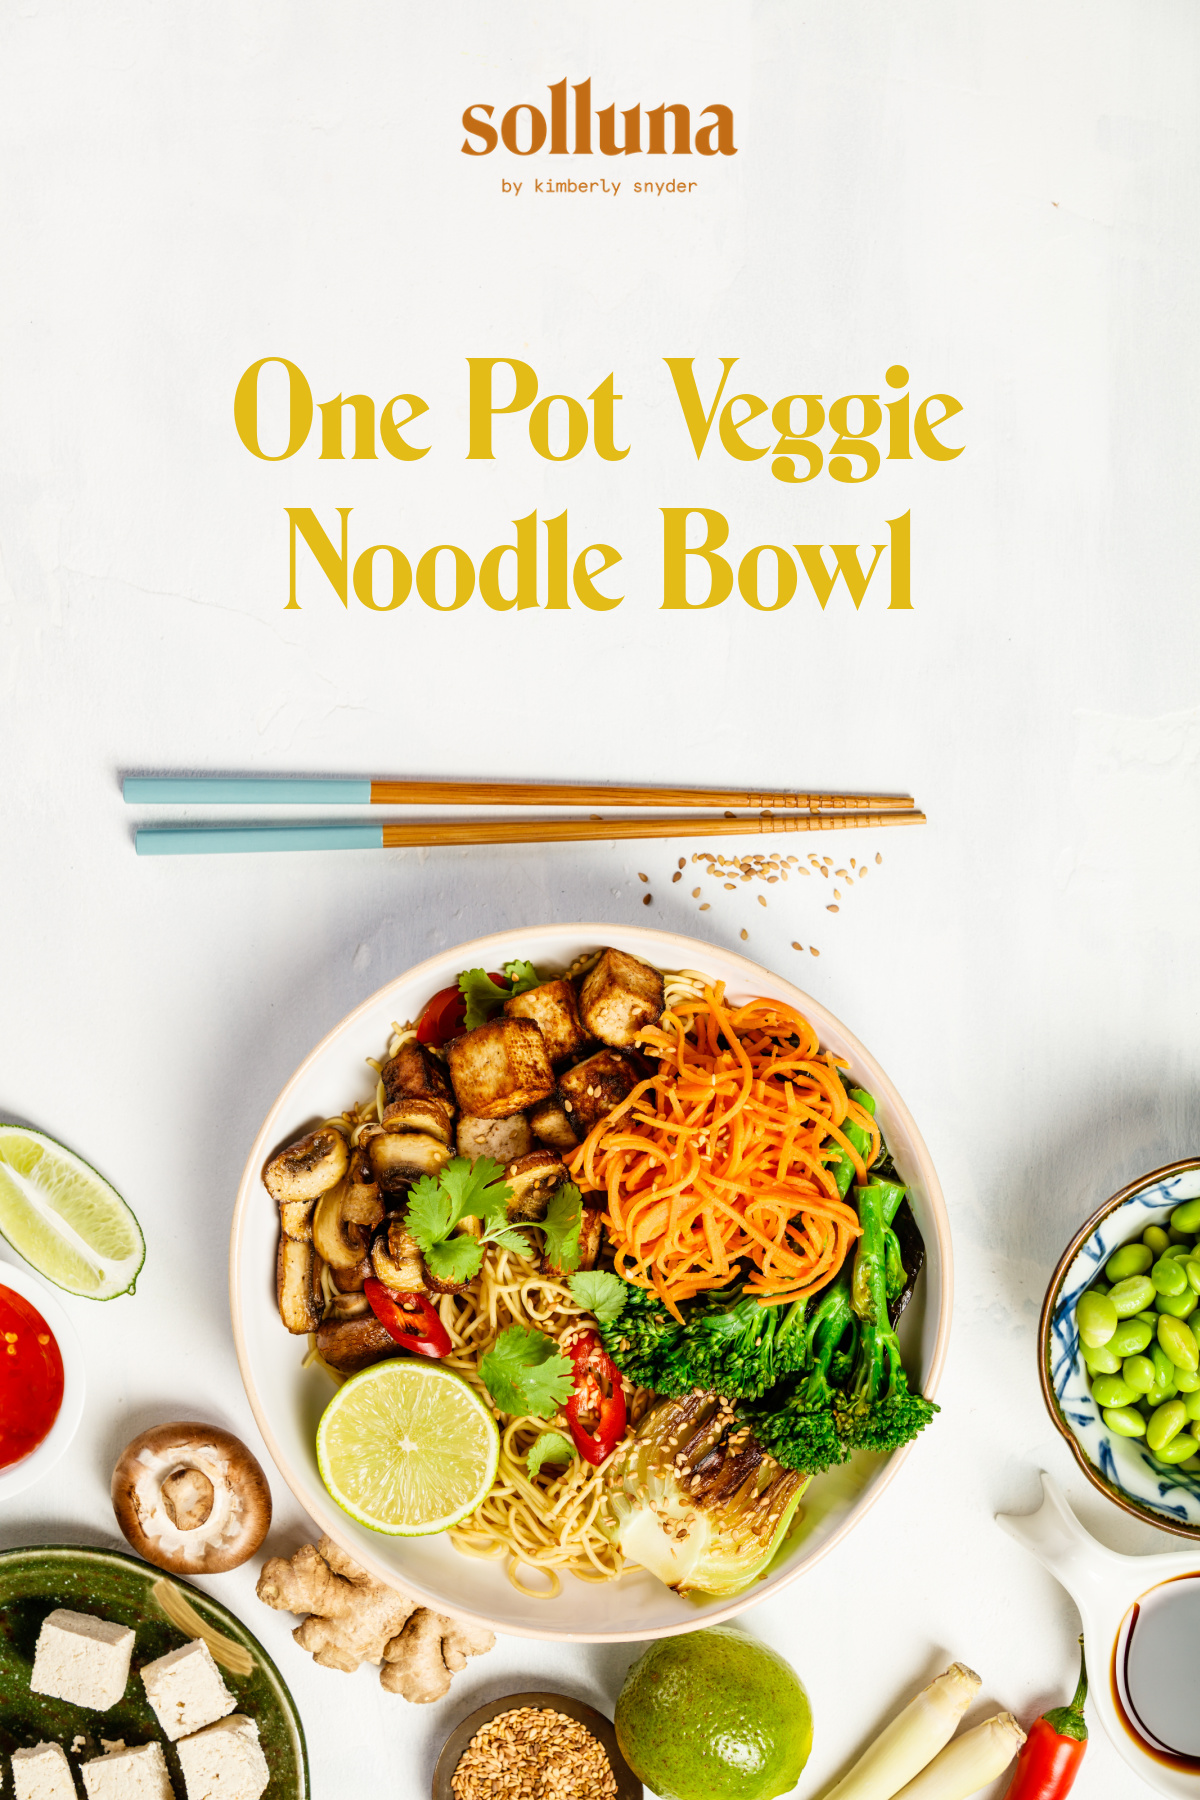 Photo of a noofle bowl with tofu, carrots and broccoli